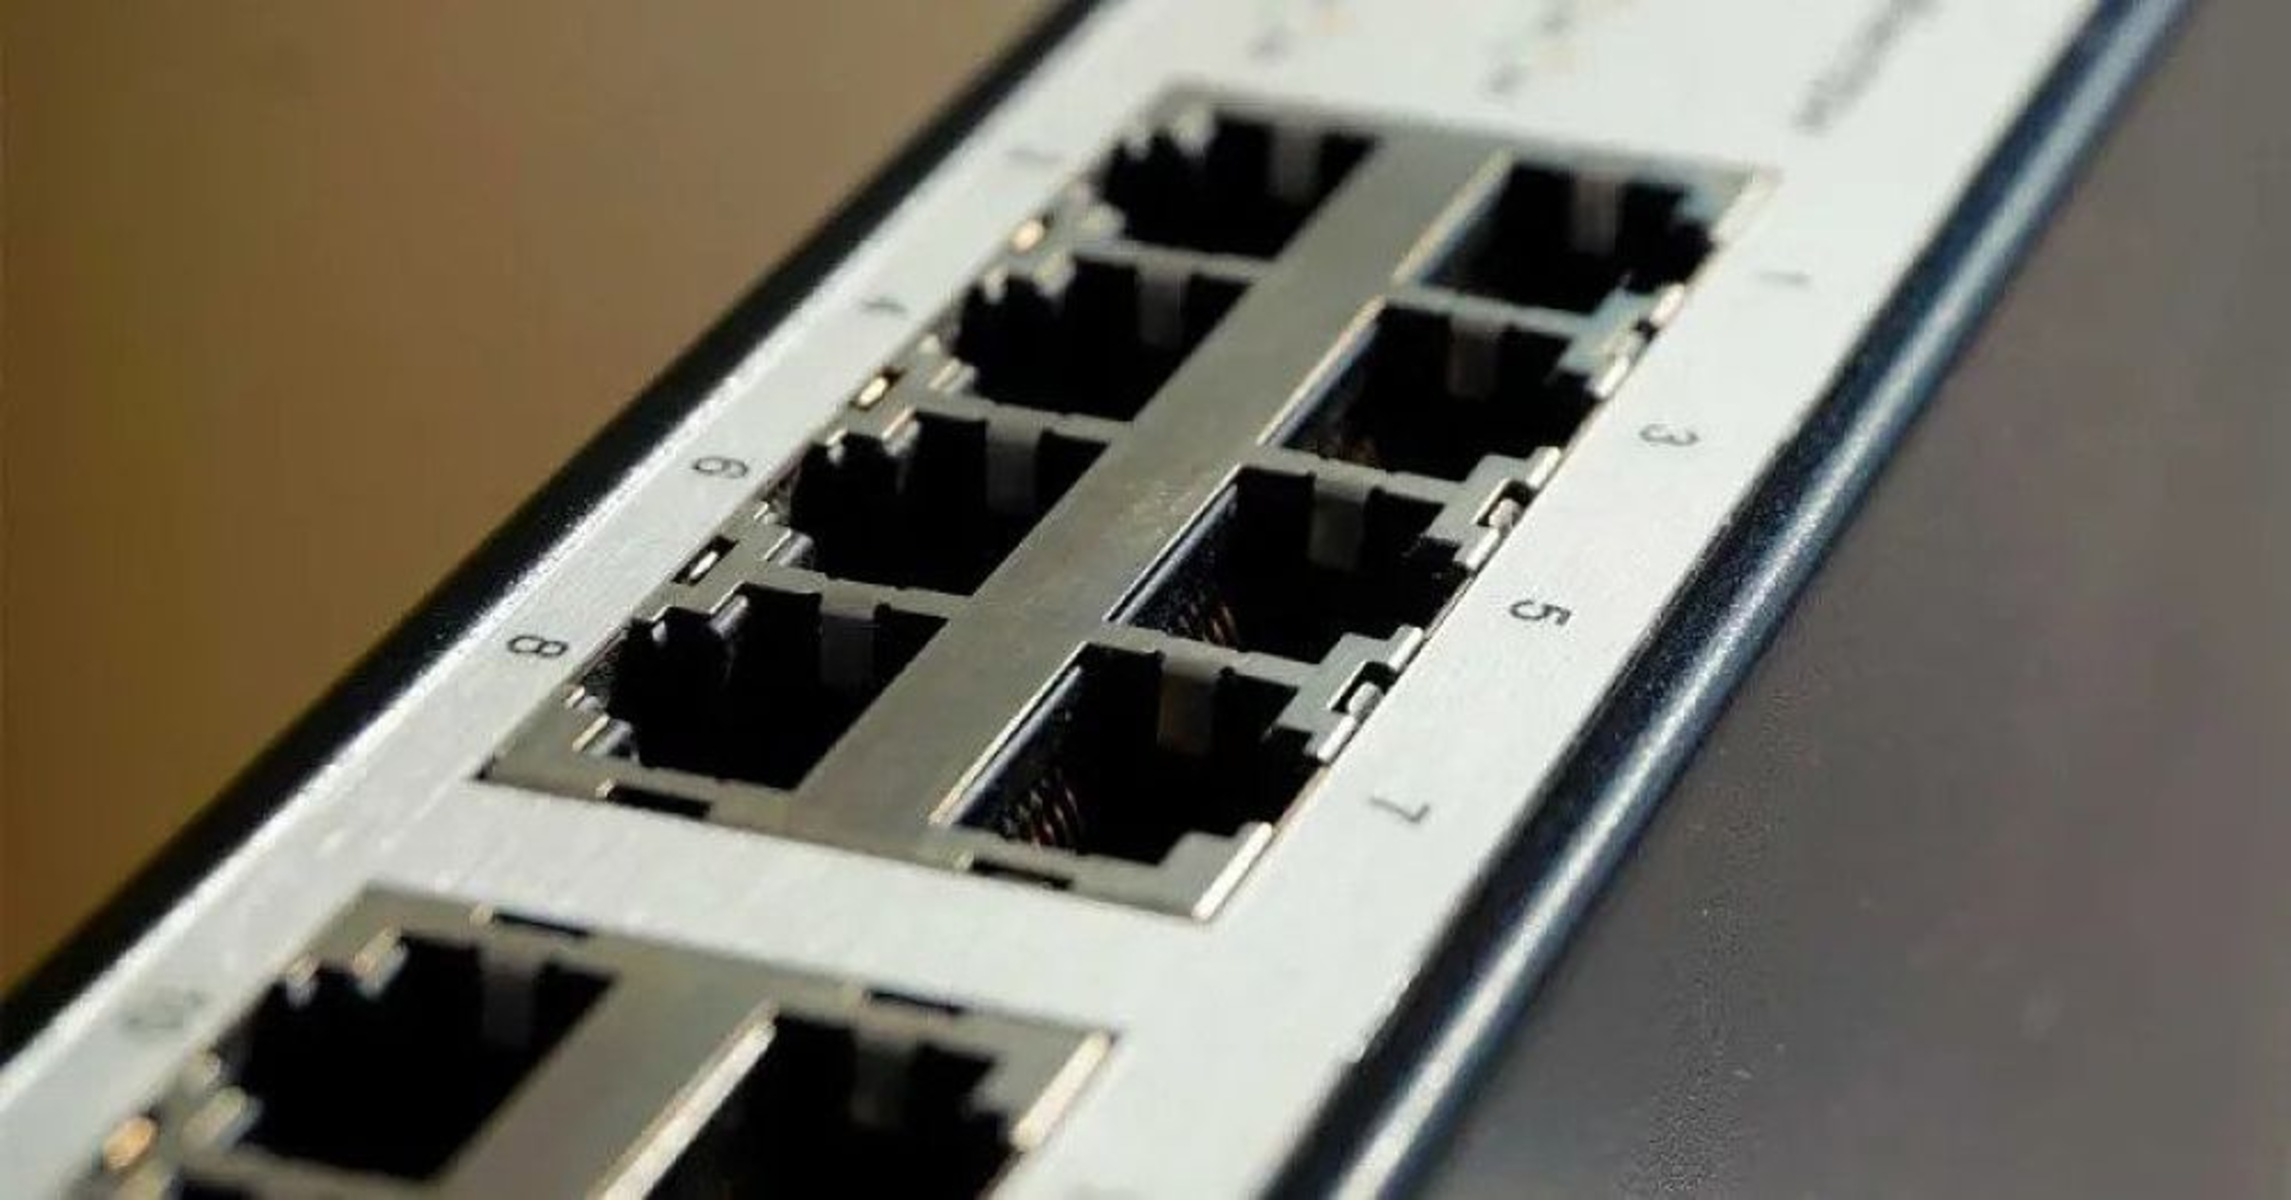 How Large Of A Network Switch Can I Use